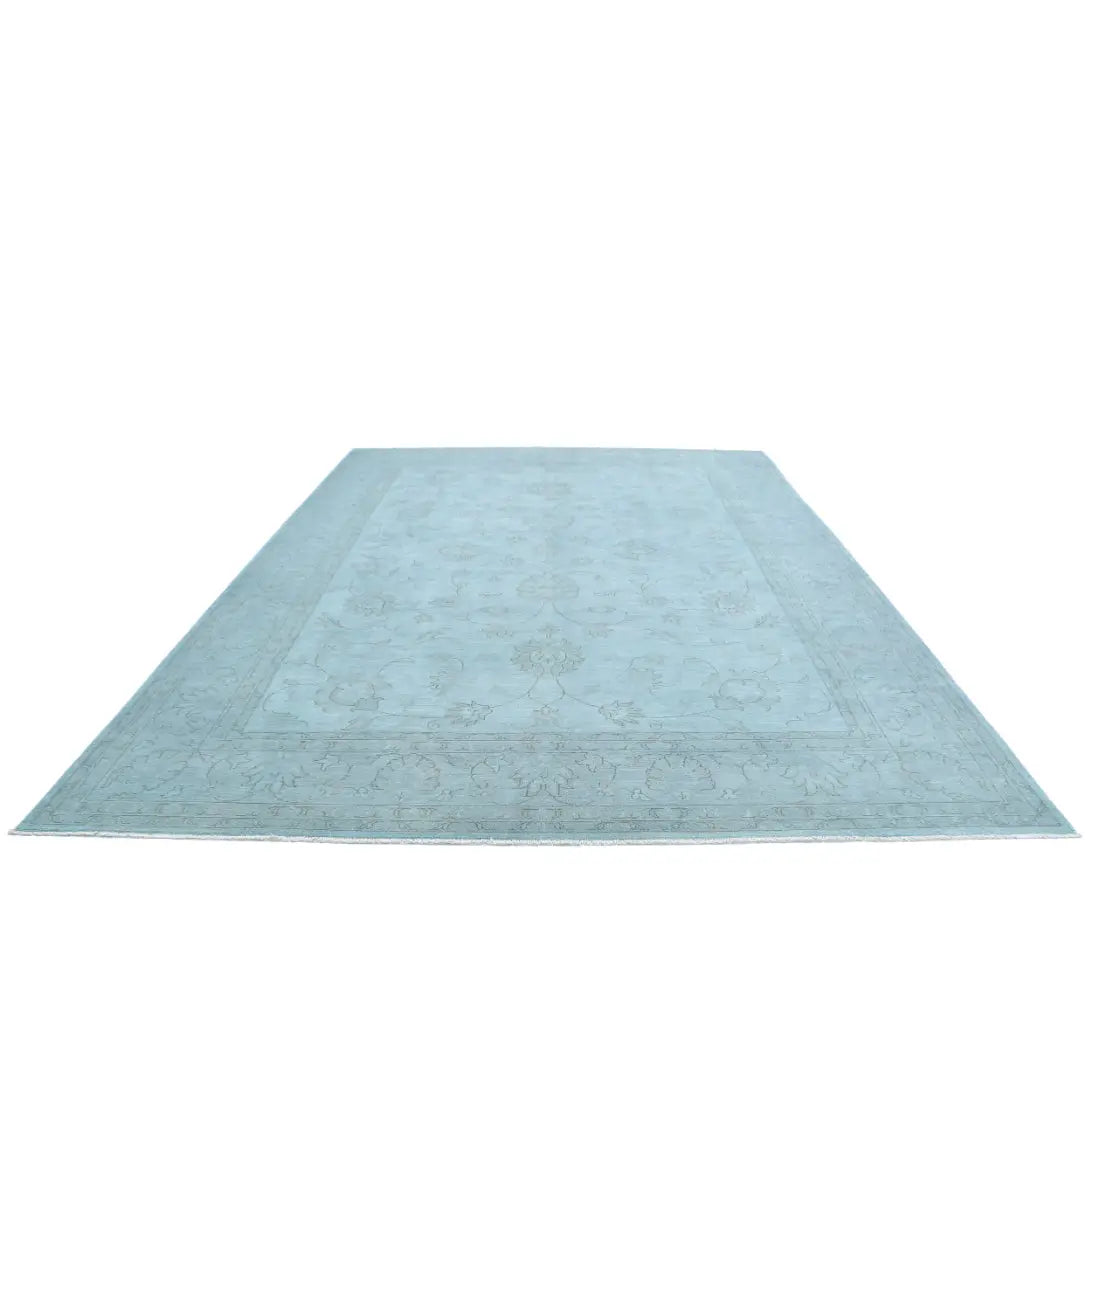 Hand Knotted Overdye Wool Rug - 9'11'' x 13'10''